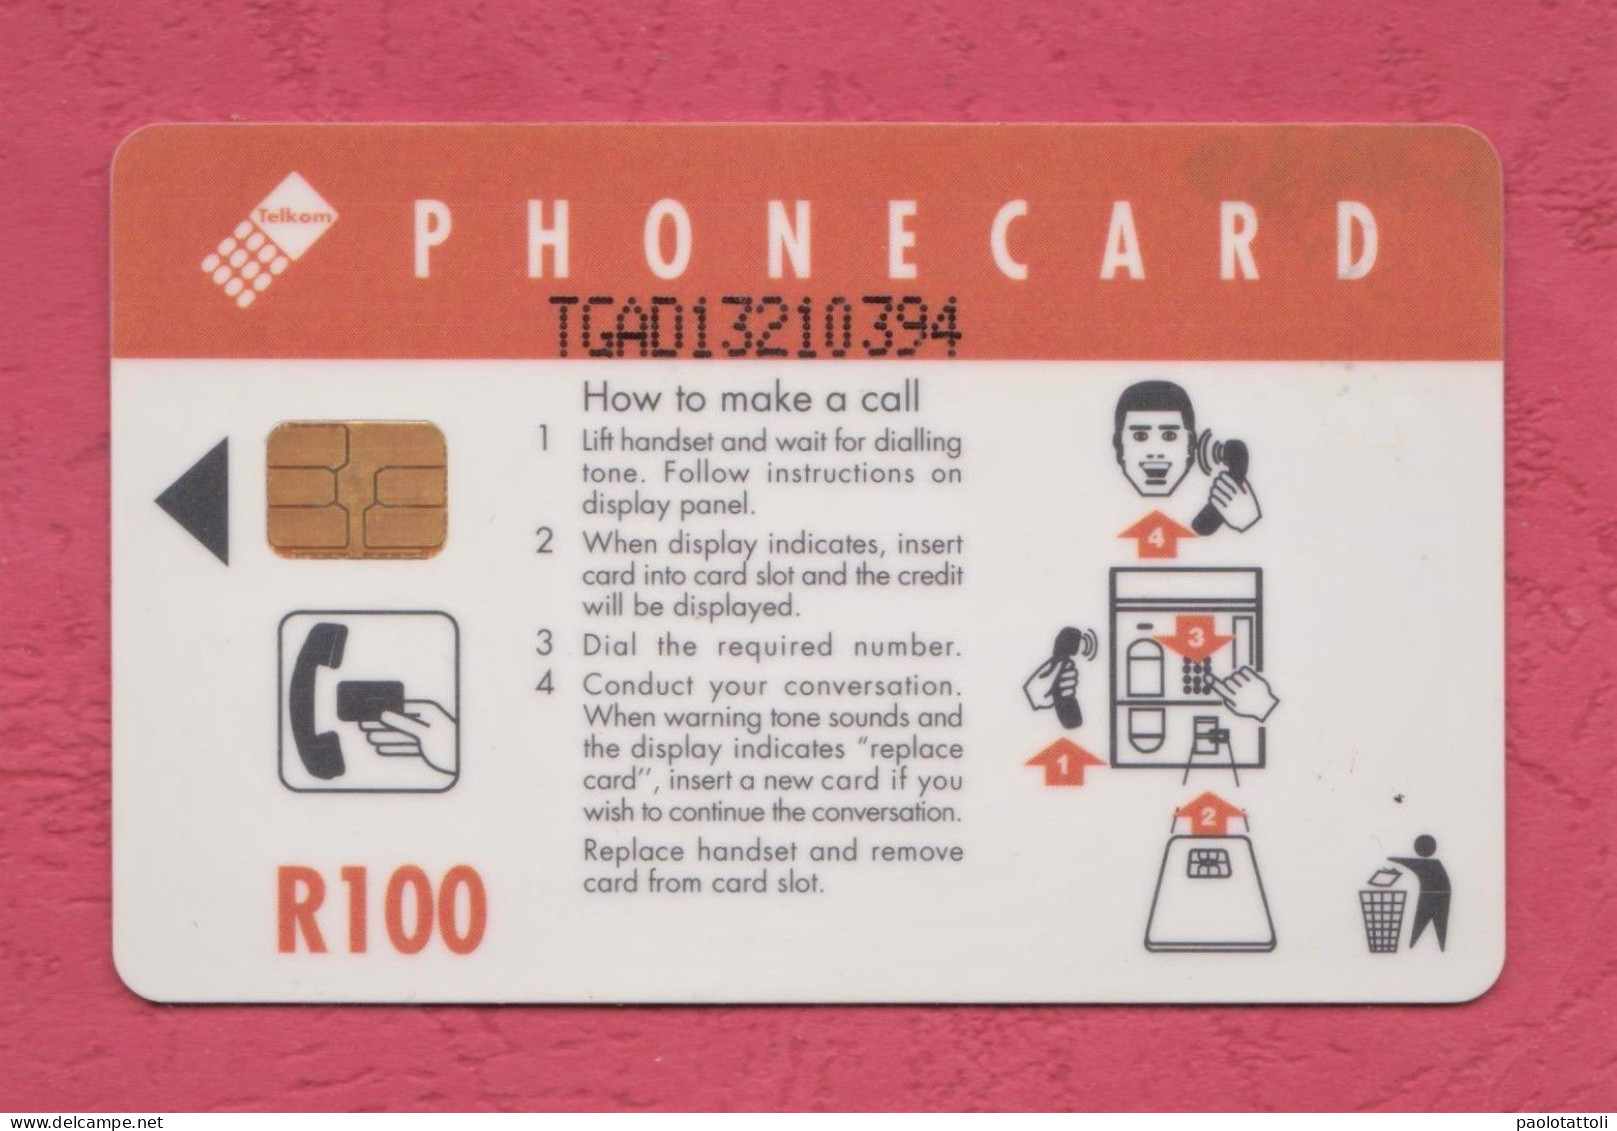 South Africa, Sud Africa- Used Phone Card With Chip By 50 & 100ands, Telkom. The Card That Gets You Talking. - Sudafrica